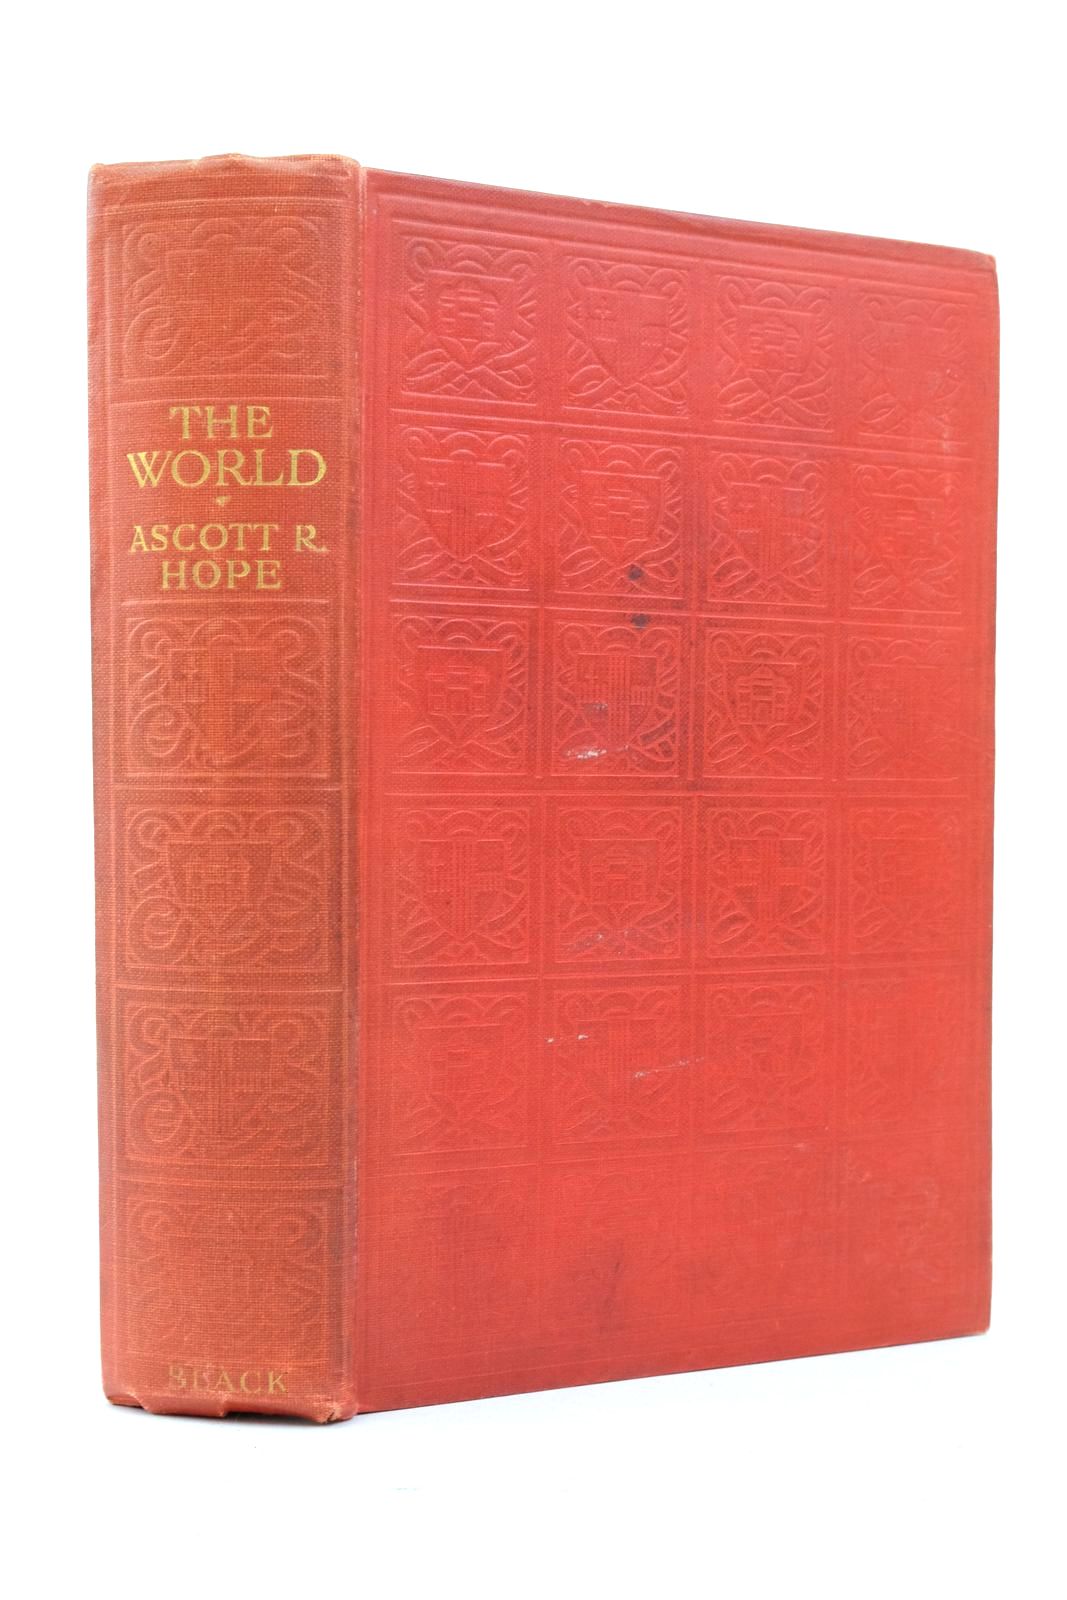 Photo of THE WORLD written by Hope, Ascott R. published by A. & C. Black Ltd. (STOCK CODE: 2137592)  for sale by Stella & Rose's Books